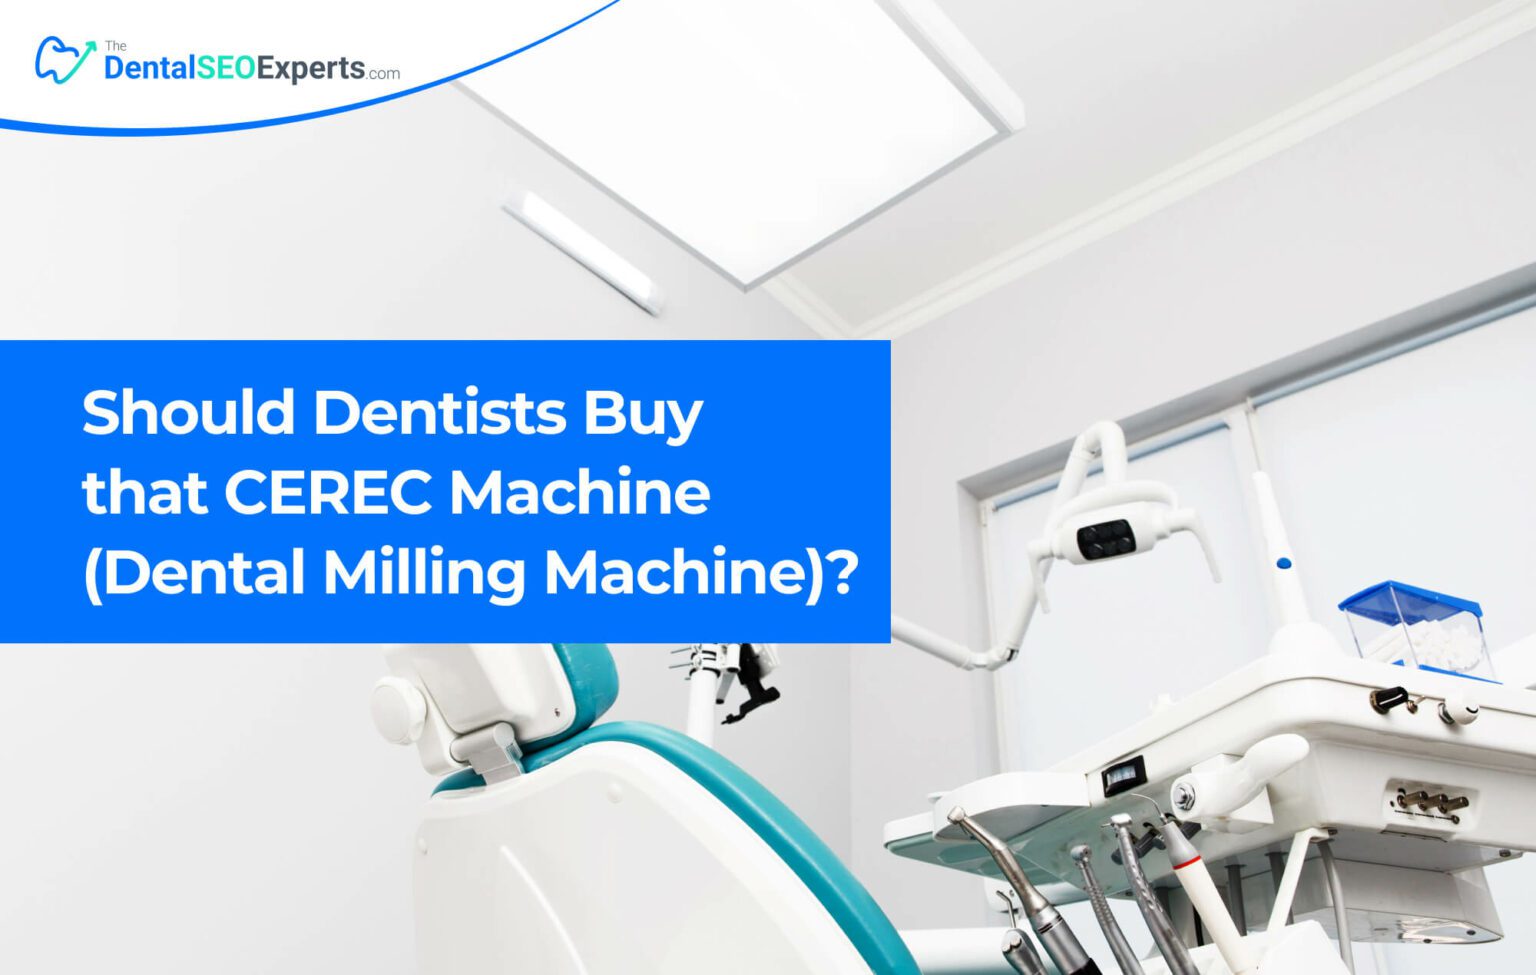 TheDentalSEOExperts - Should Dentists Buy that CEREC Machine